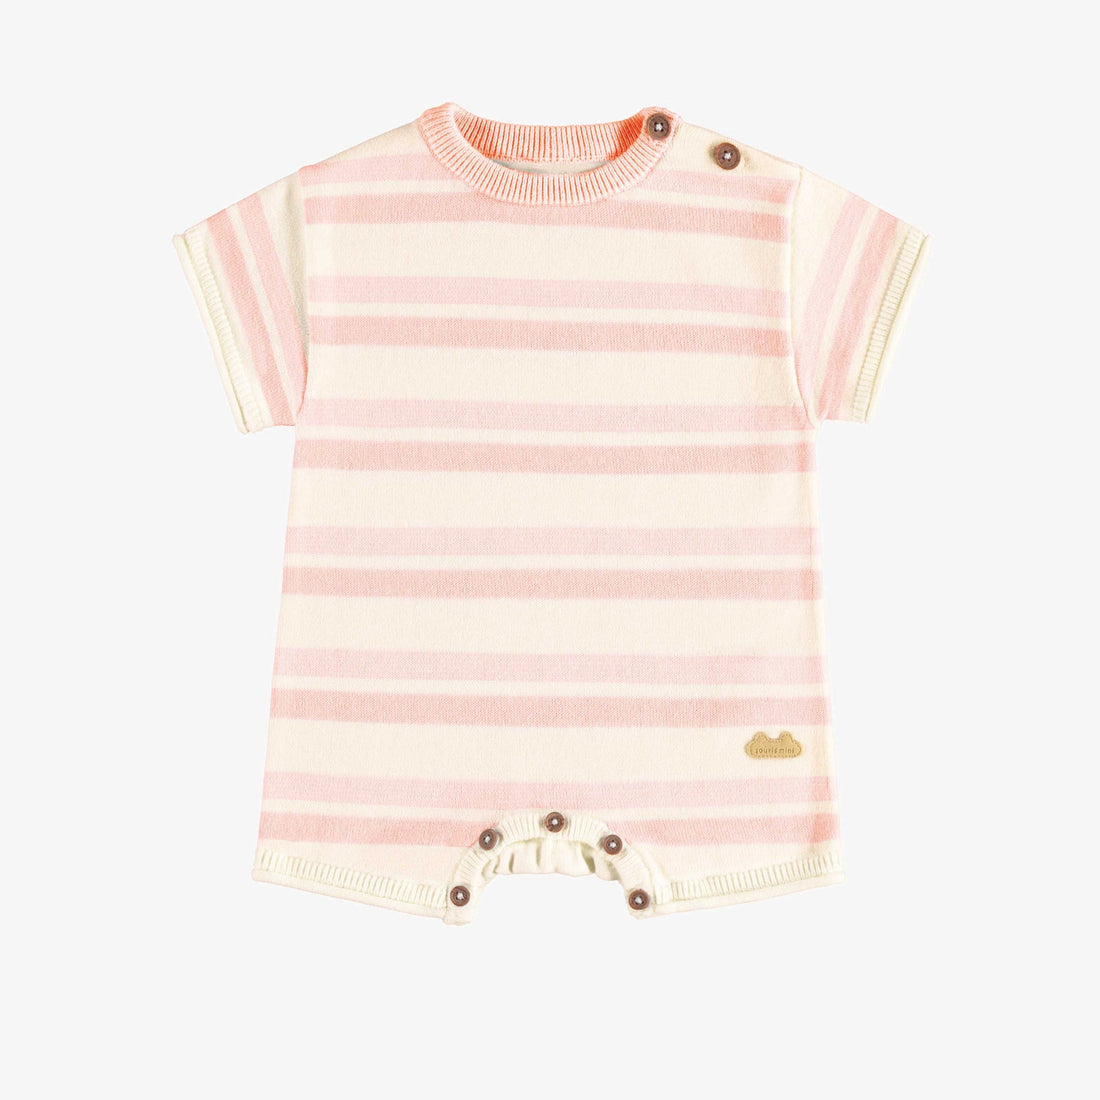 RIB KNITTED ONE PIECE WITH PINK AND CREAM STRIPES, NEWBORN